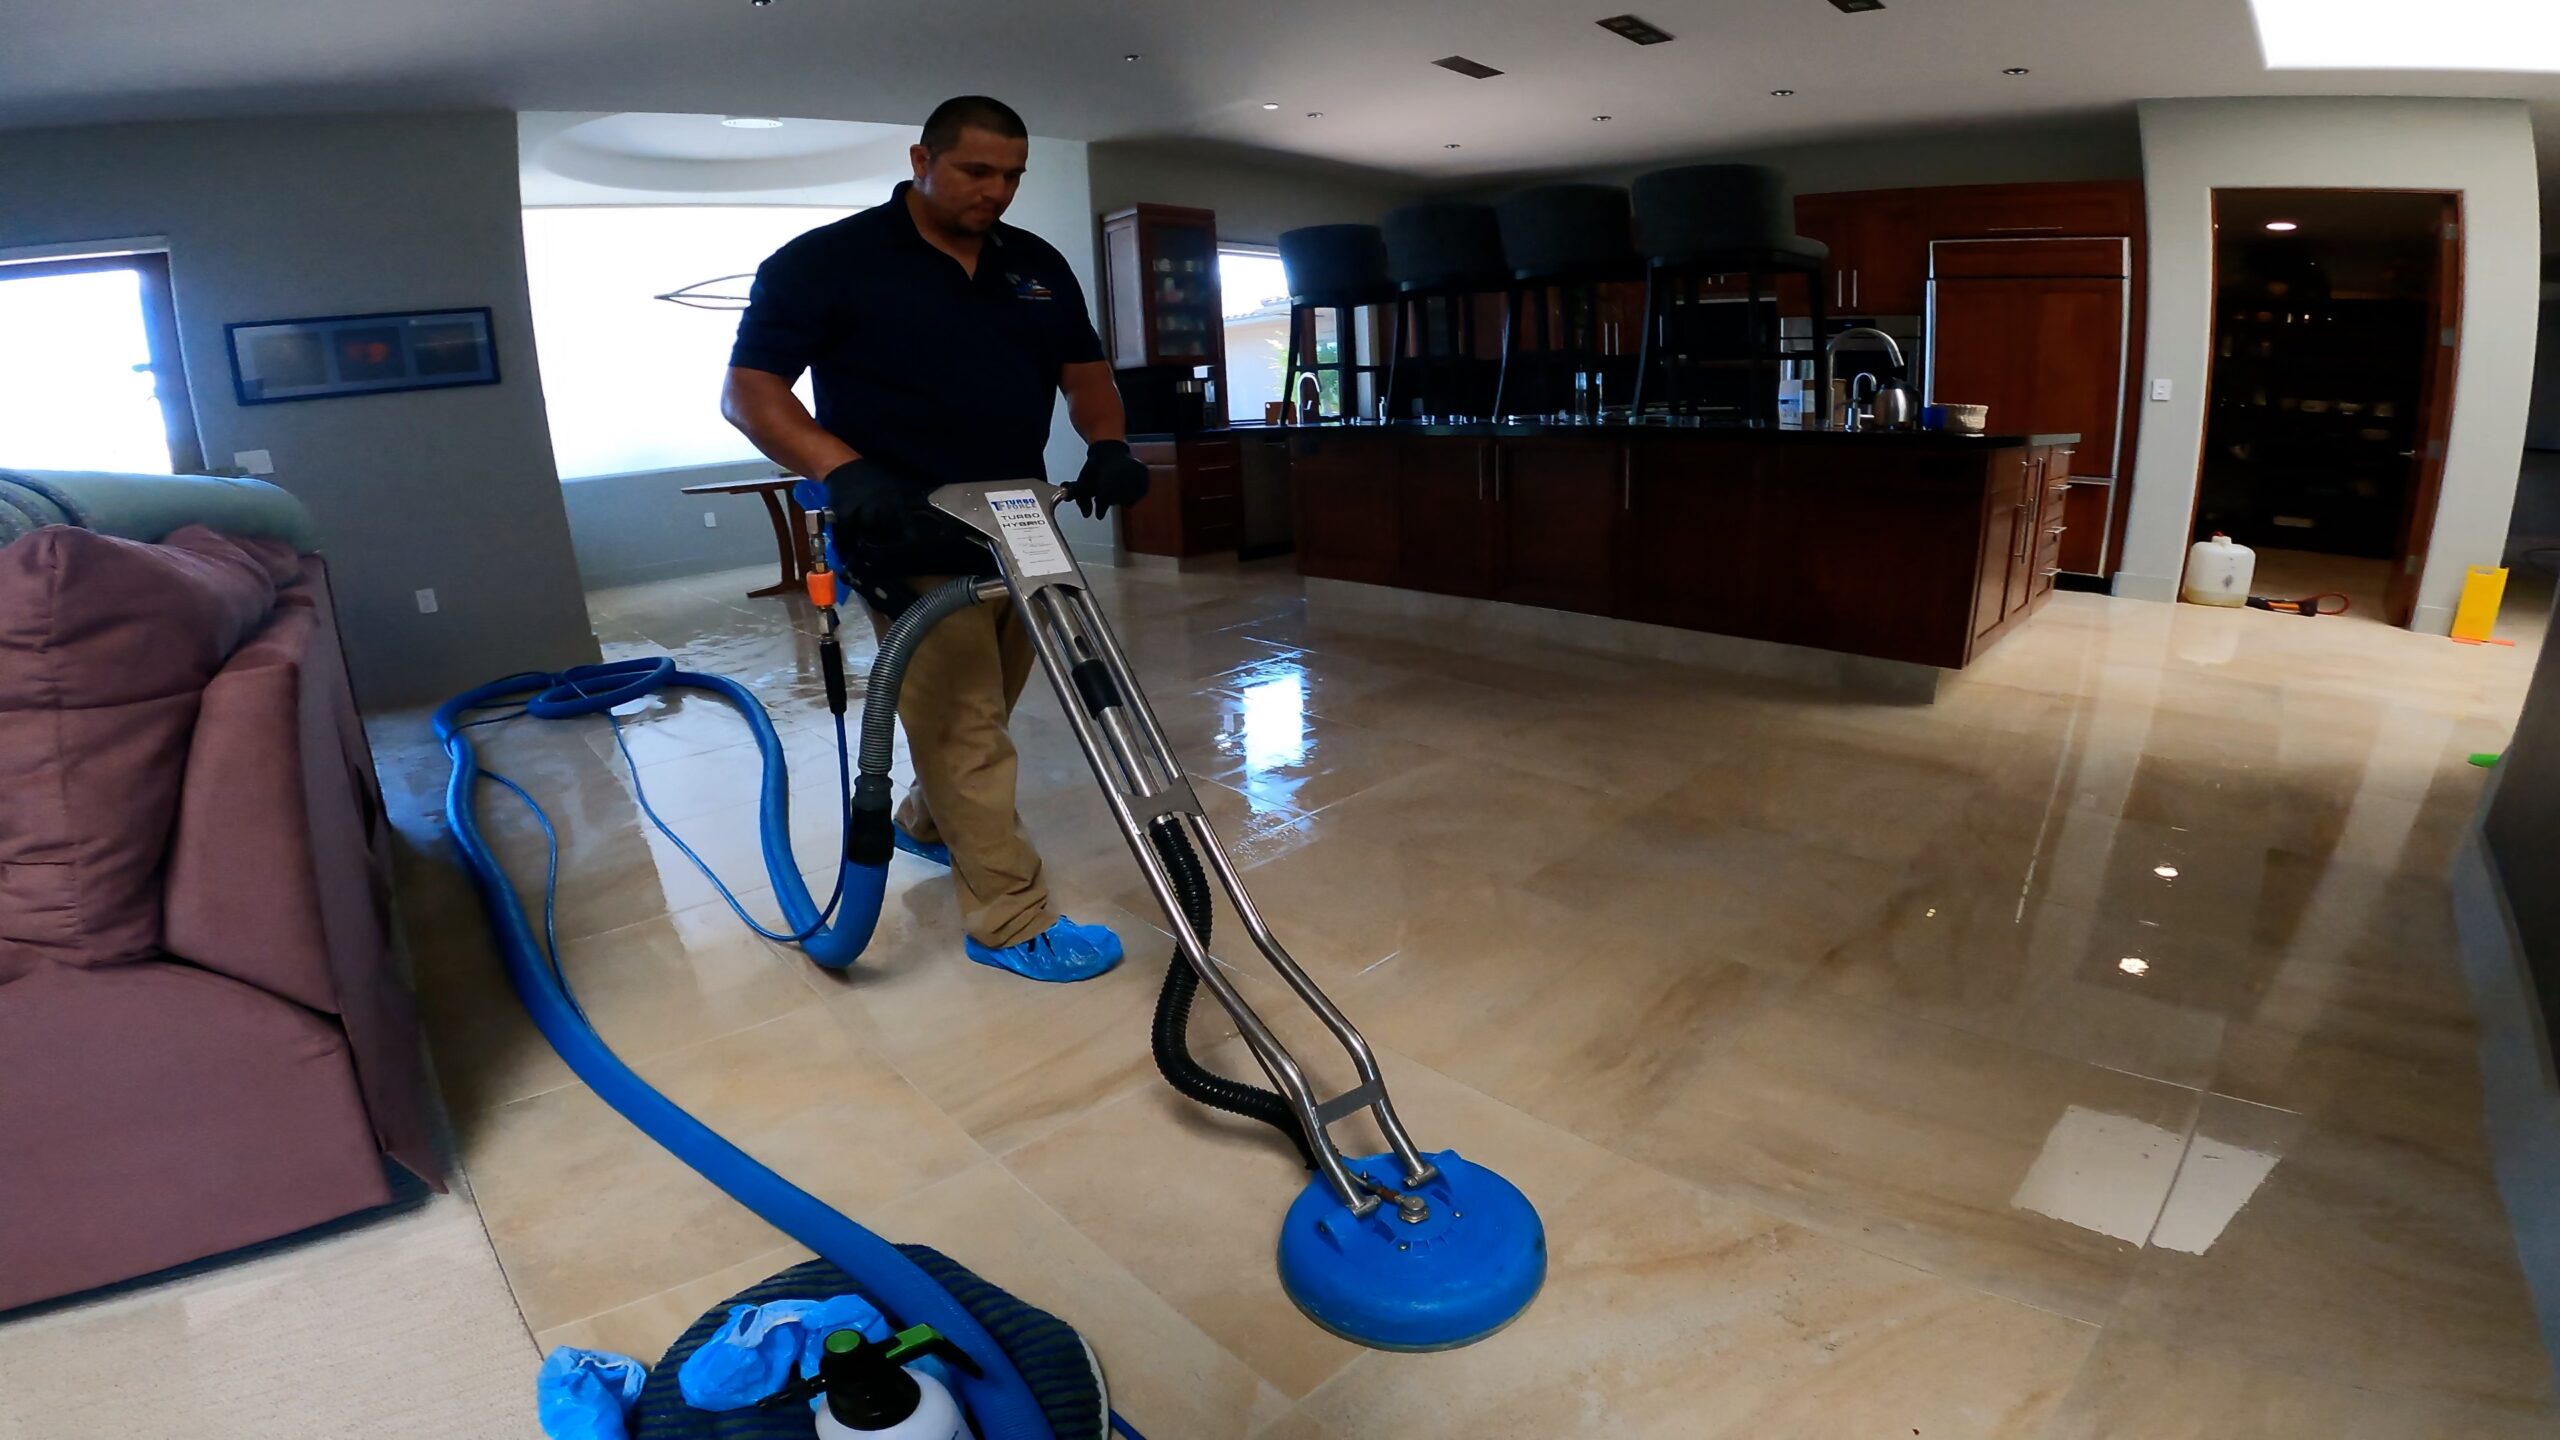 Carpets Furniture Tile Grout Air Ducts Cleaning Serviceore